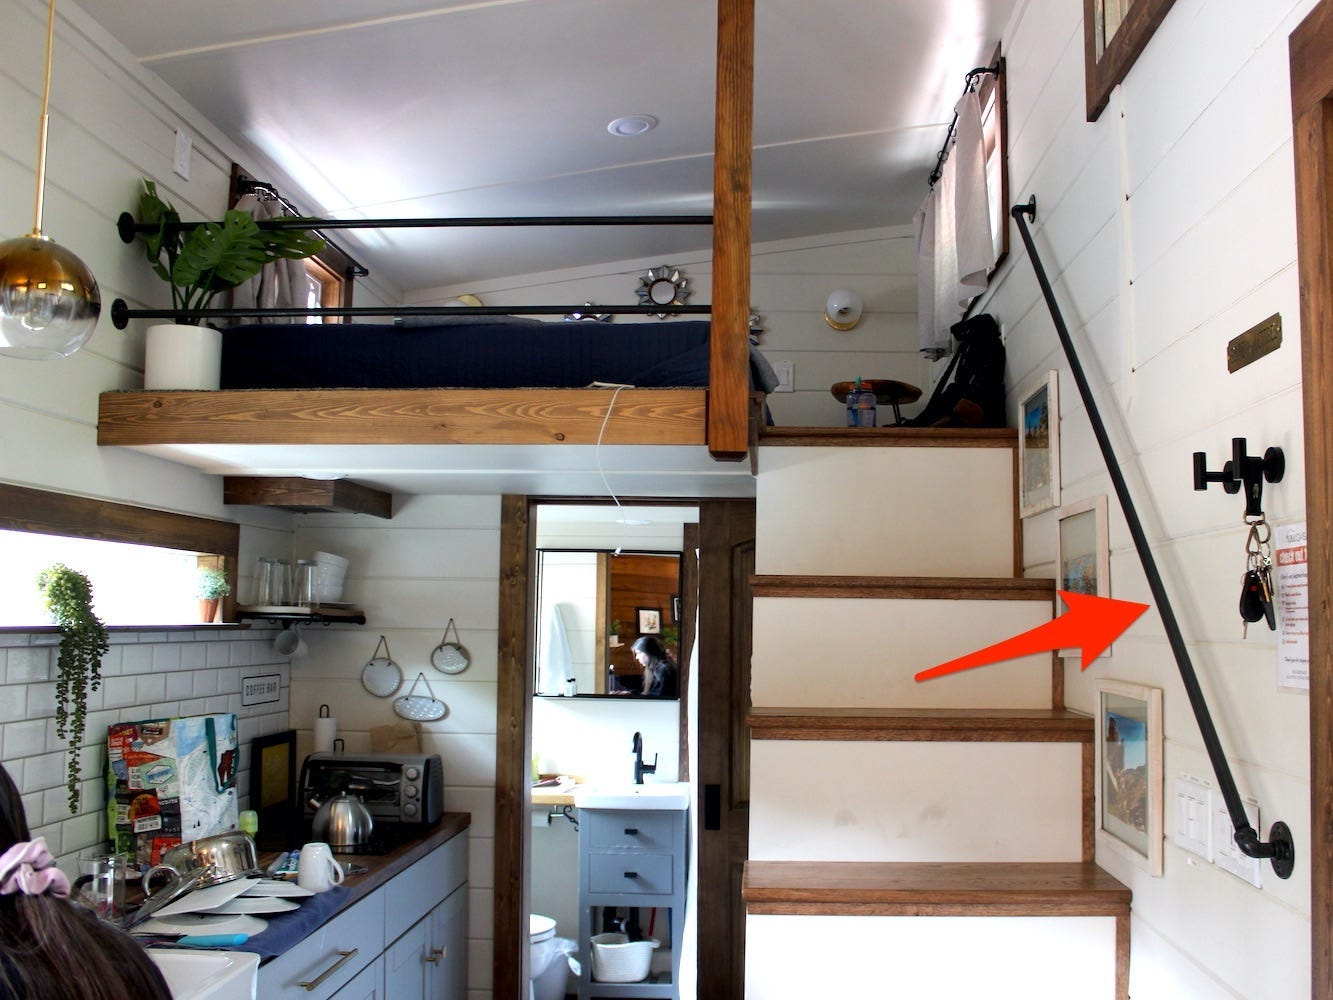 An arrow points to the handrail in the tiny house.